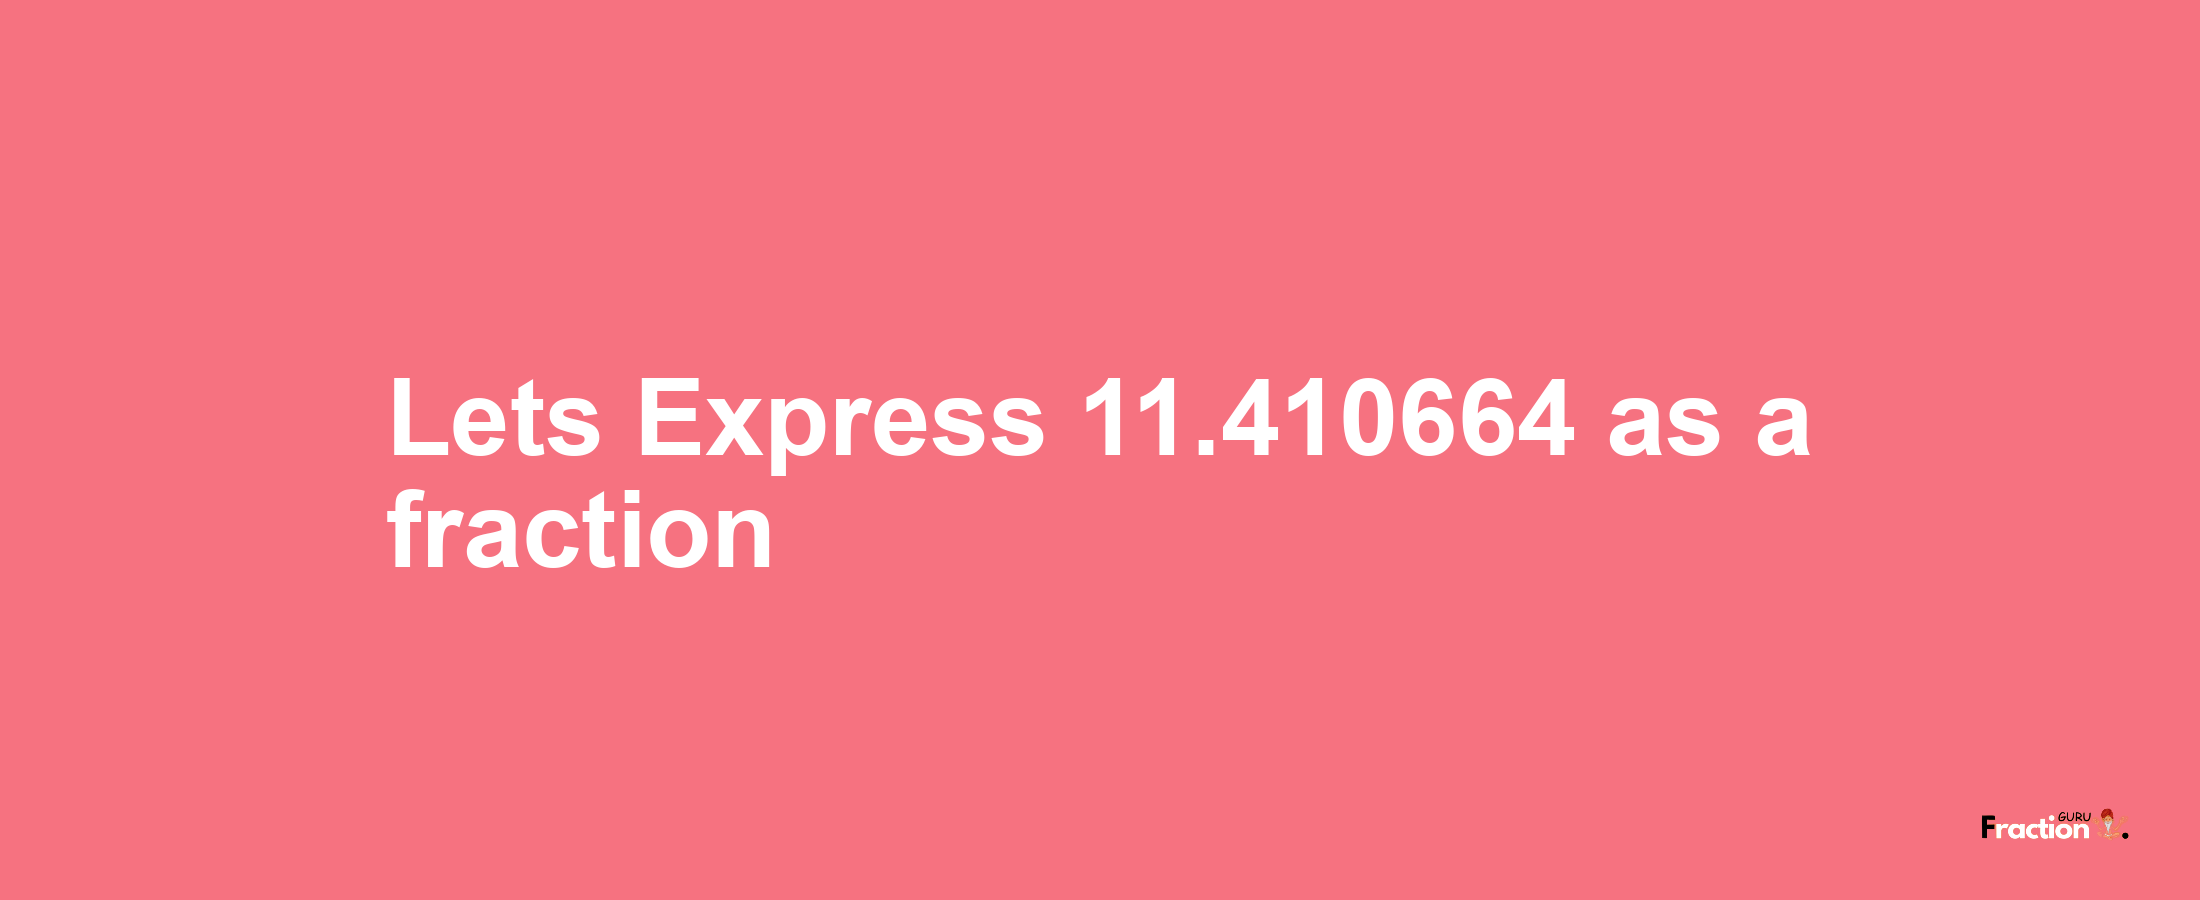 Lets Express 11.410664 as afraction